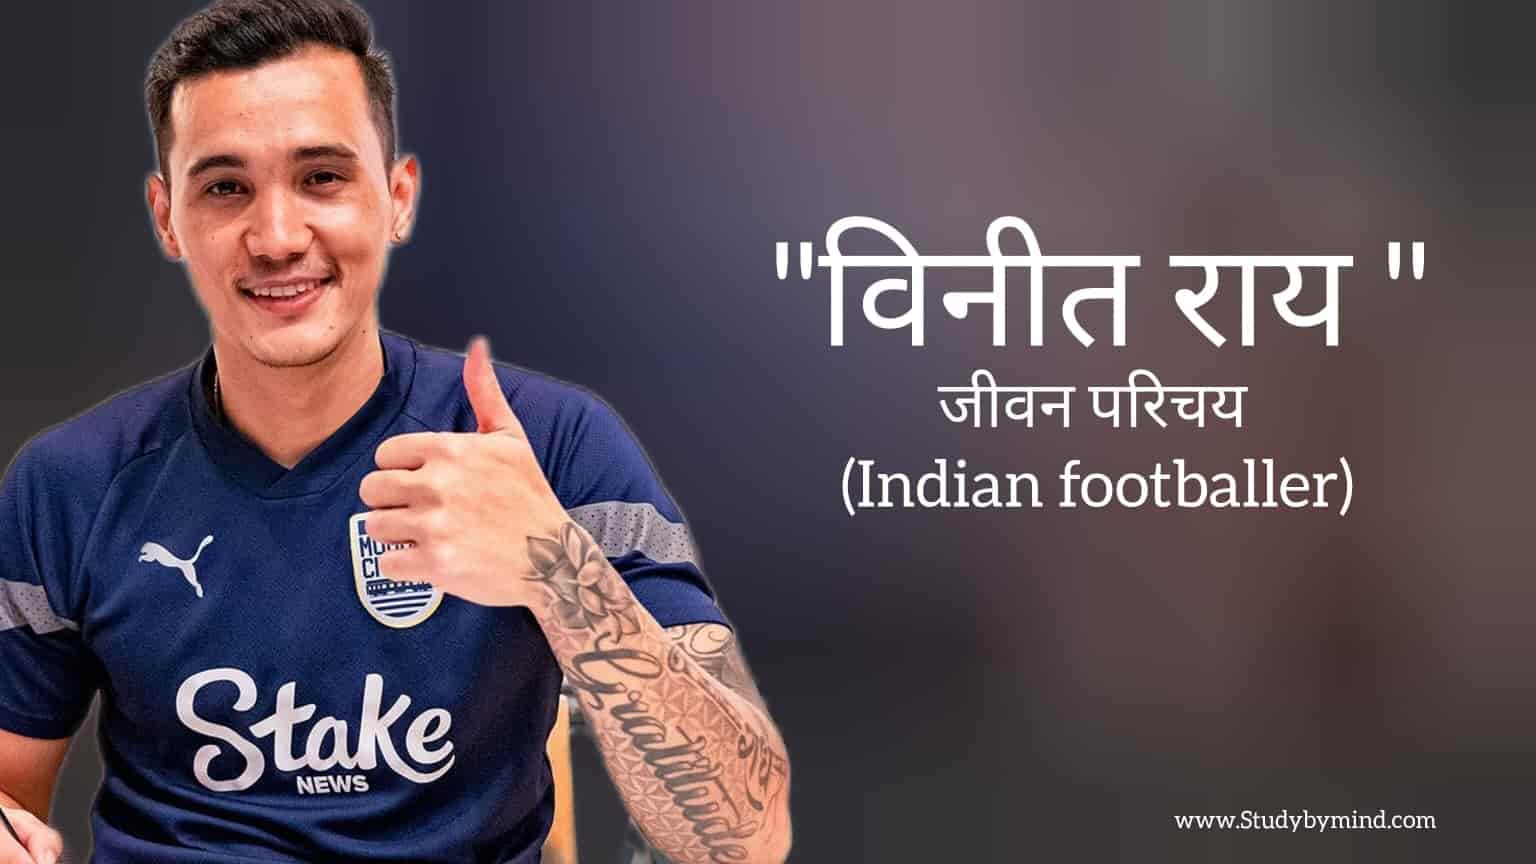 You are currently viewing विनीत राय जीवन परिचय Vinit Rai biography in hindi (Indian footballer)